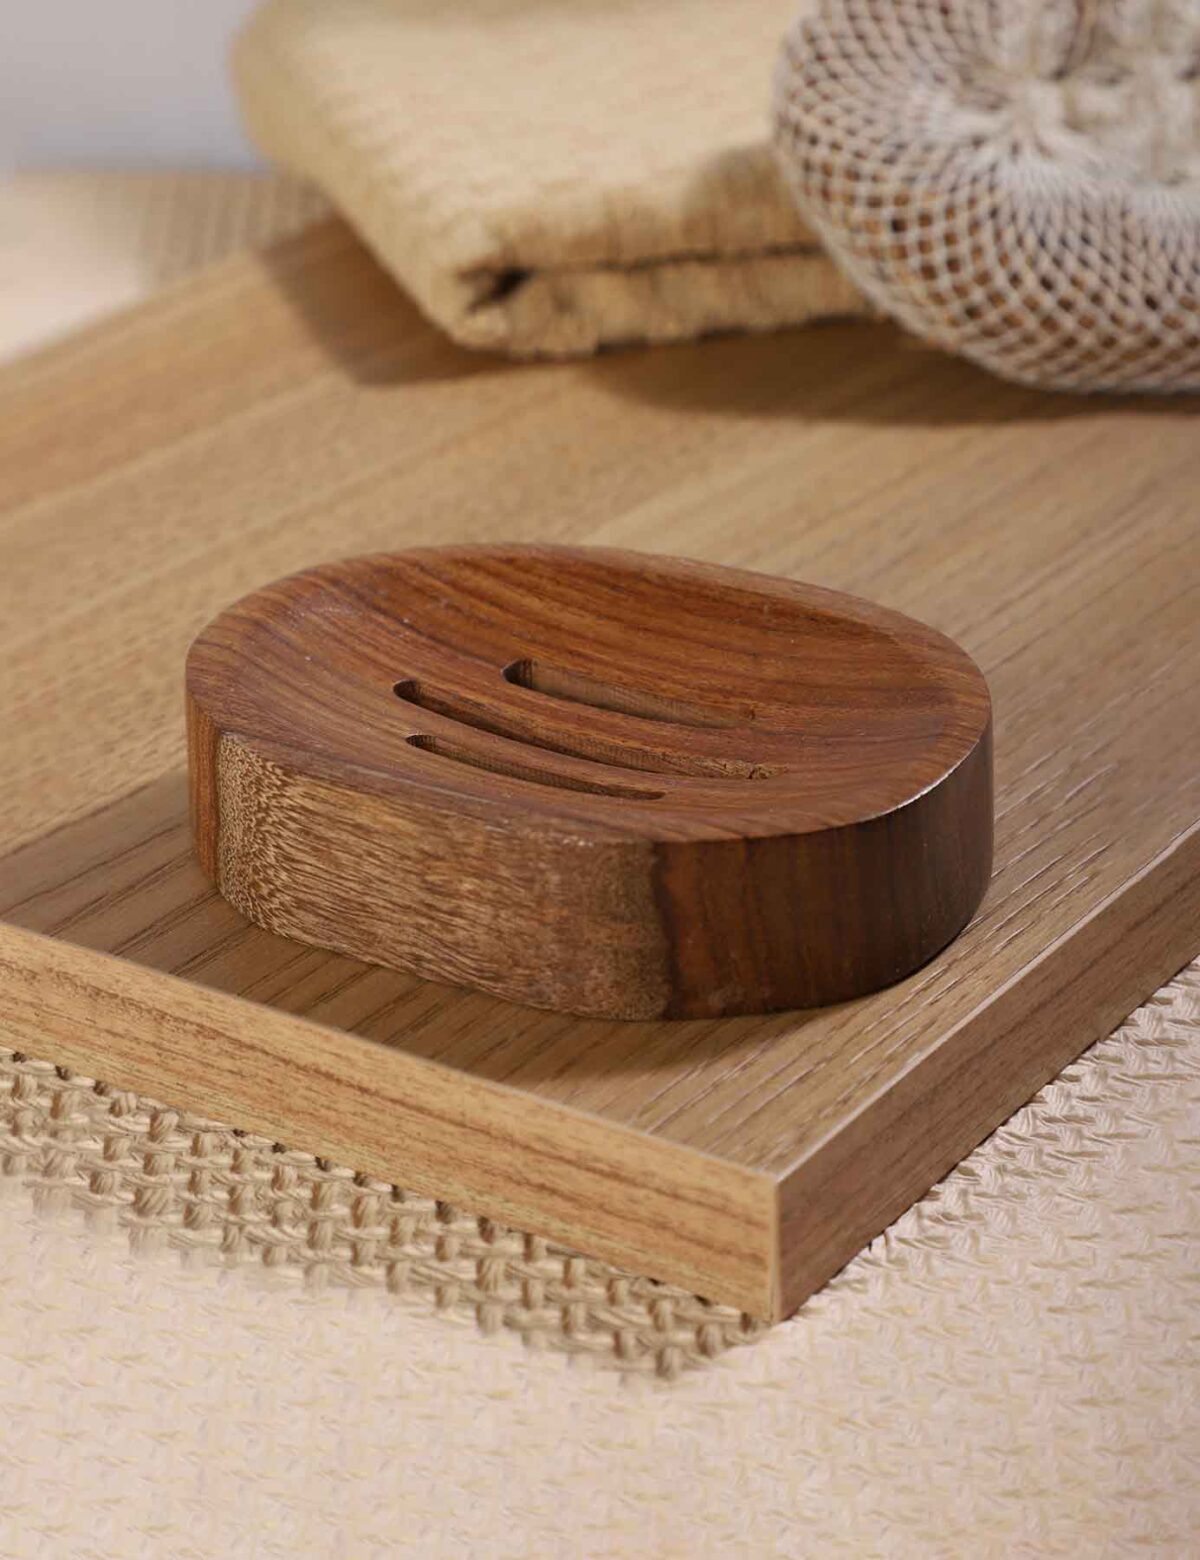 Why Choosing the Right Wood is Crucial for Your Soap Dish